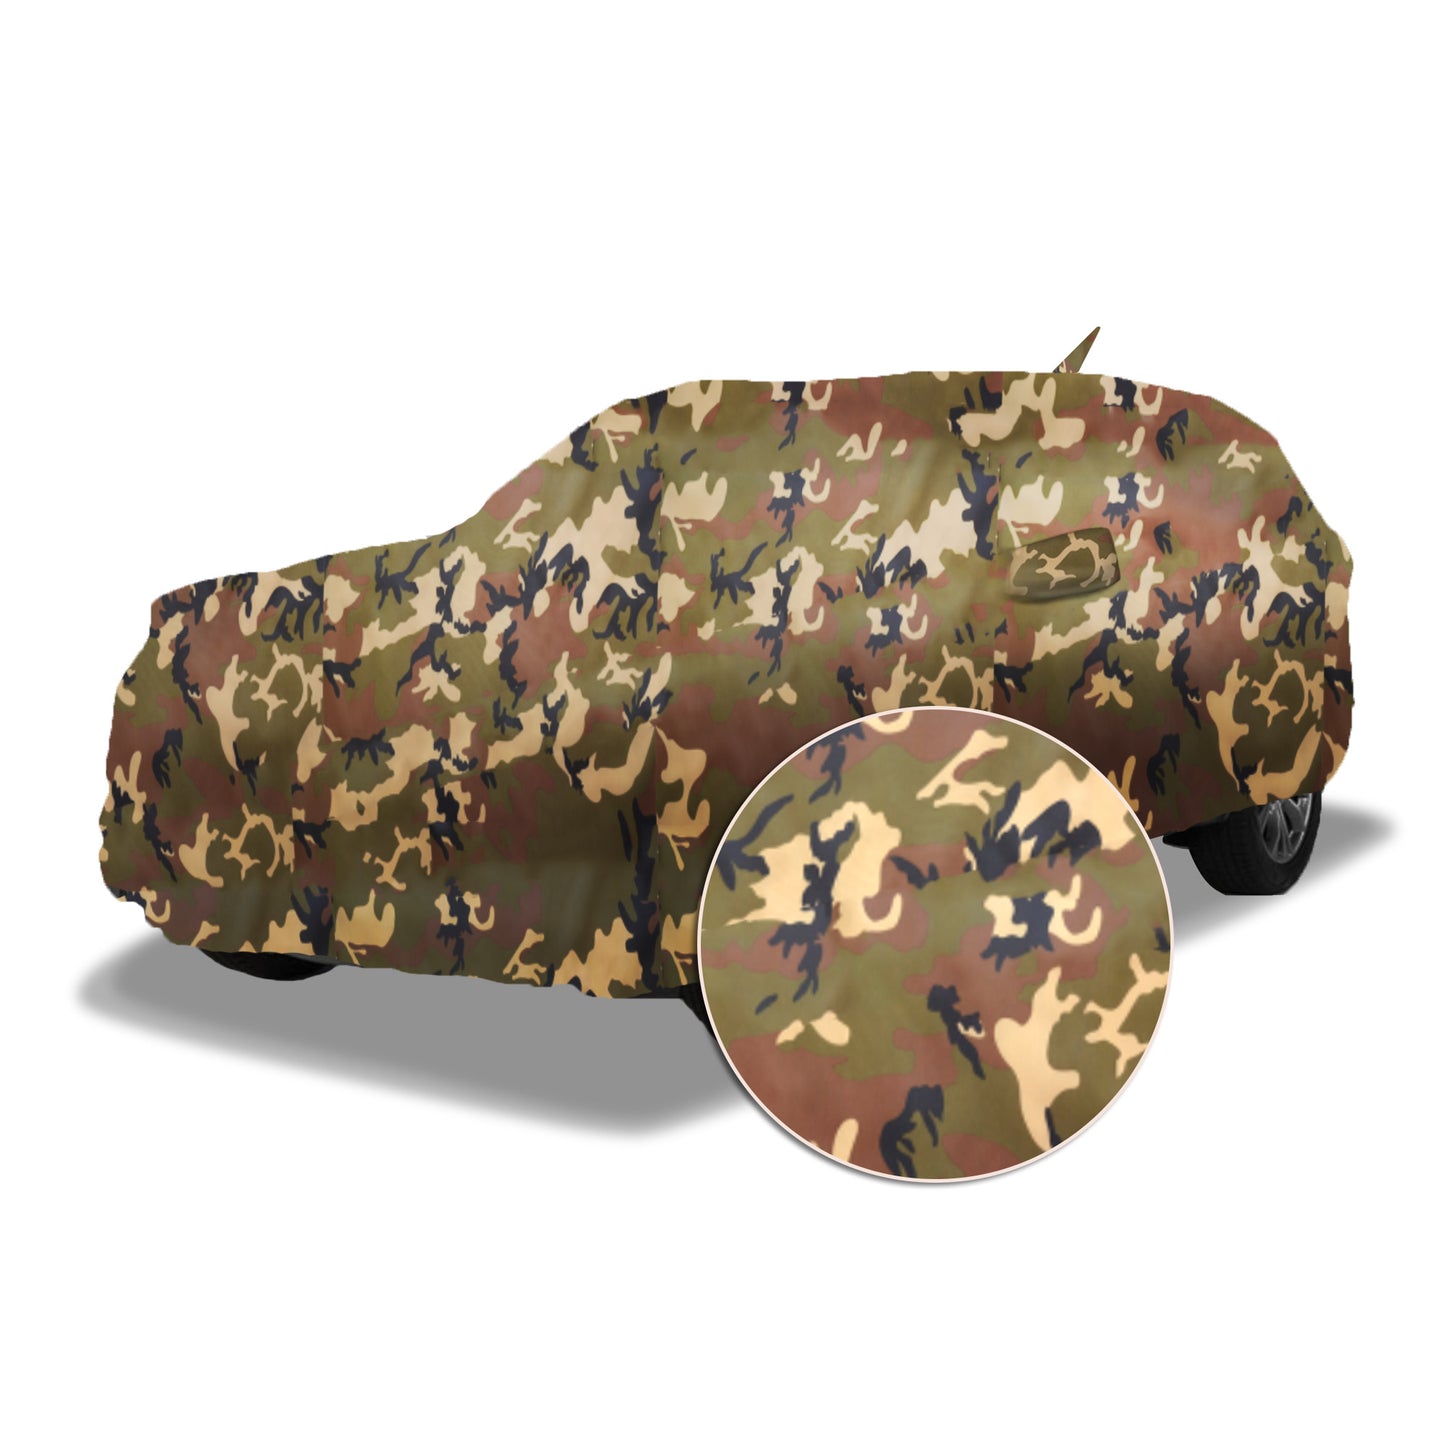 Ascot Hyundai Alcazar Car Body Cover Extra Strong & Dust Proof Jungle Military Car Cover with UV Proof & Water-Resistant Coating